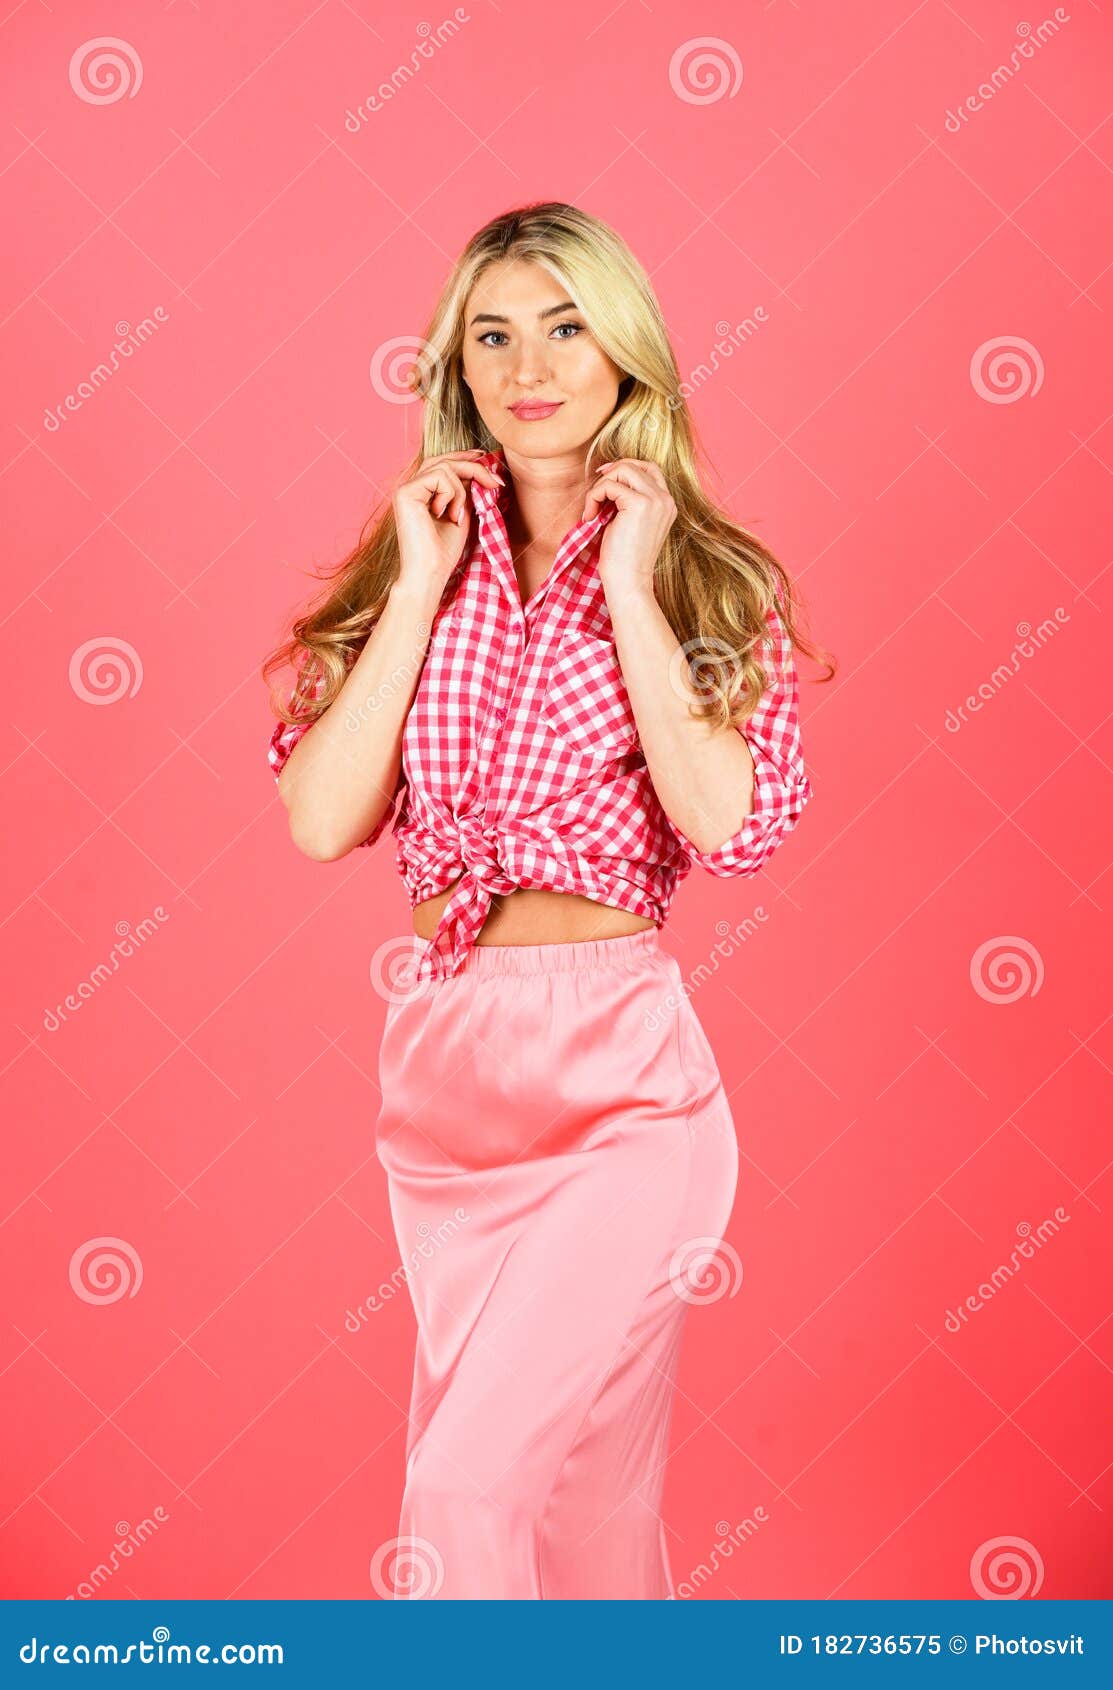 Young and Beautiful. Beauty and Fashion. Blonde Wear Vintage Clothes. Retro  Woman with Makeup Stock Image - Image of elegant, makeup: 182736575